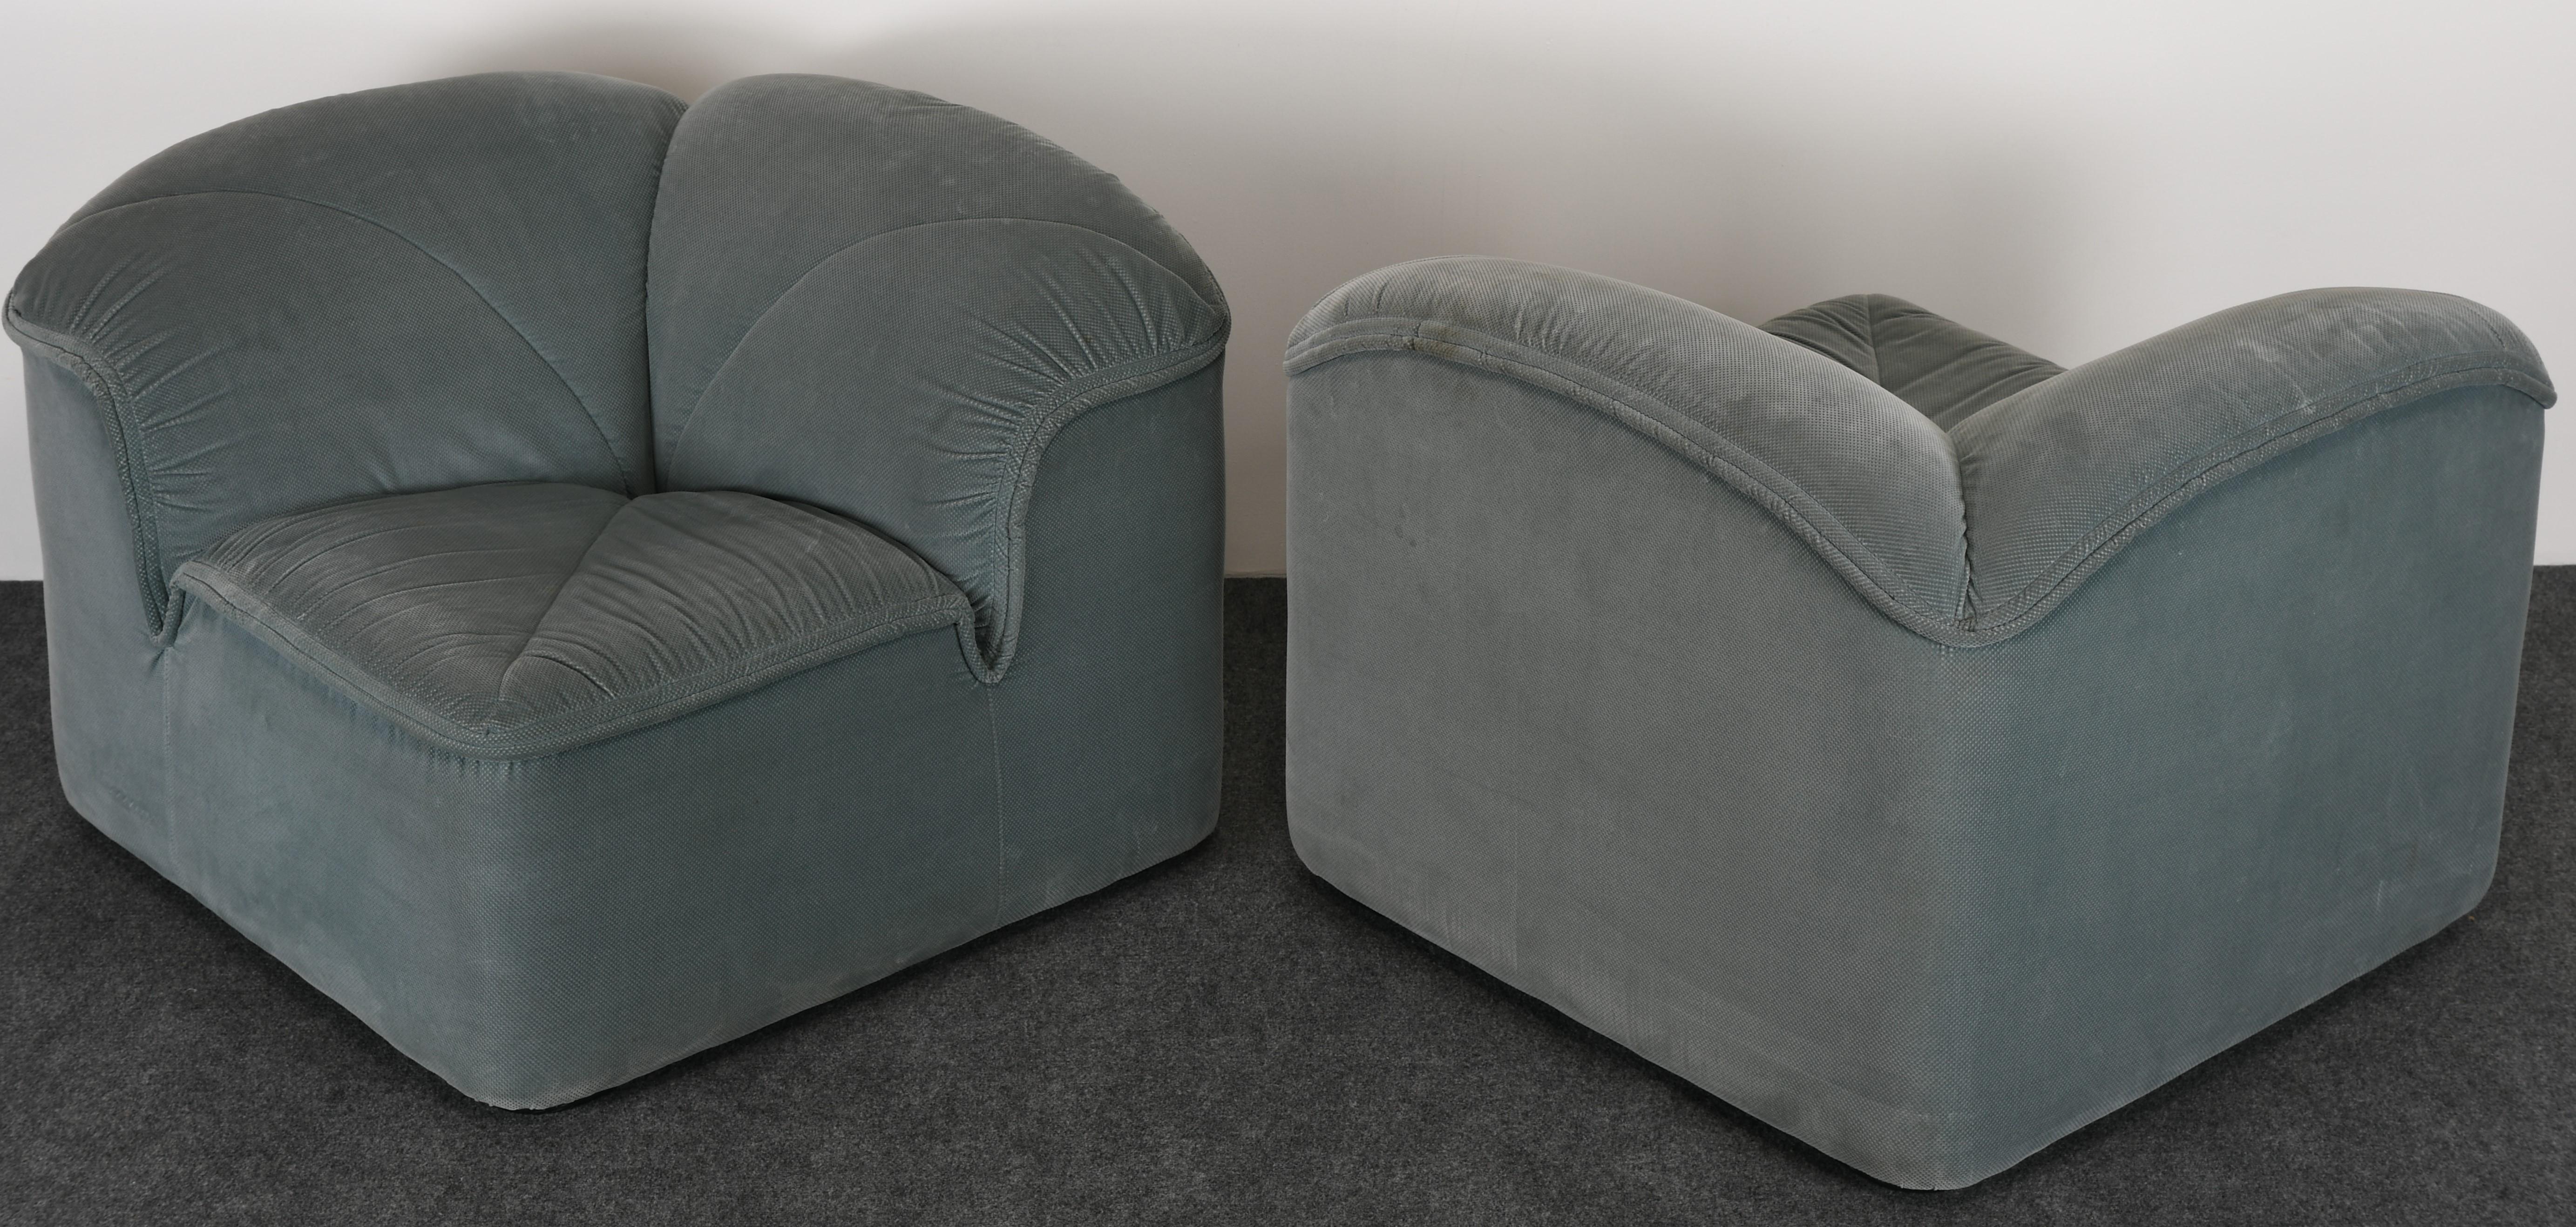 A sculptural pair of Mid-Century Modern Mariani lounge chairs made exclusively for Pace collection, Inc. 

Dimensions: 29